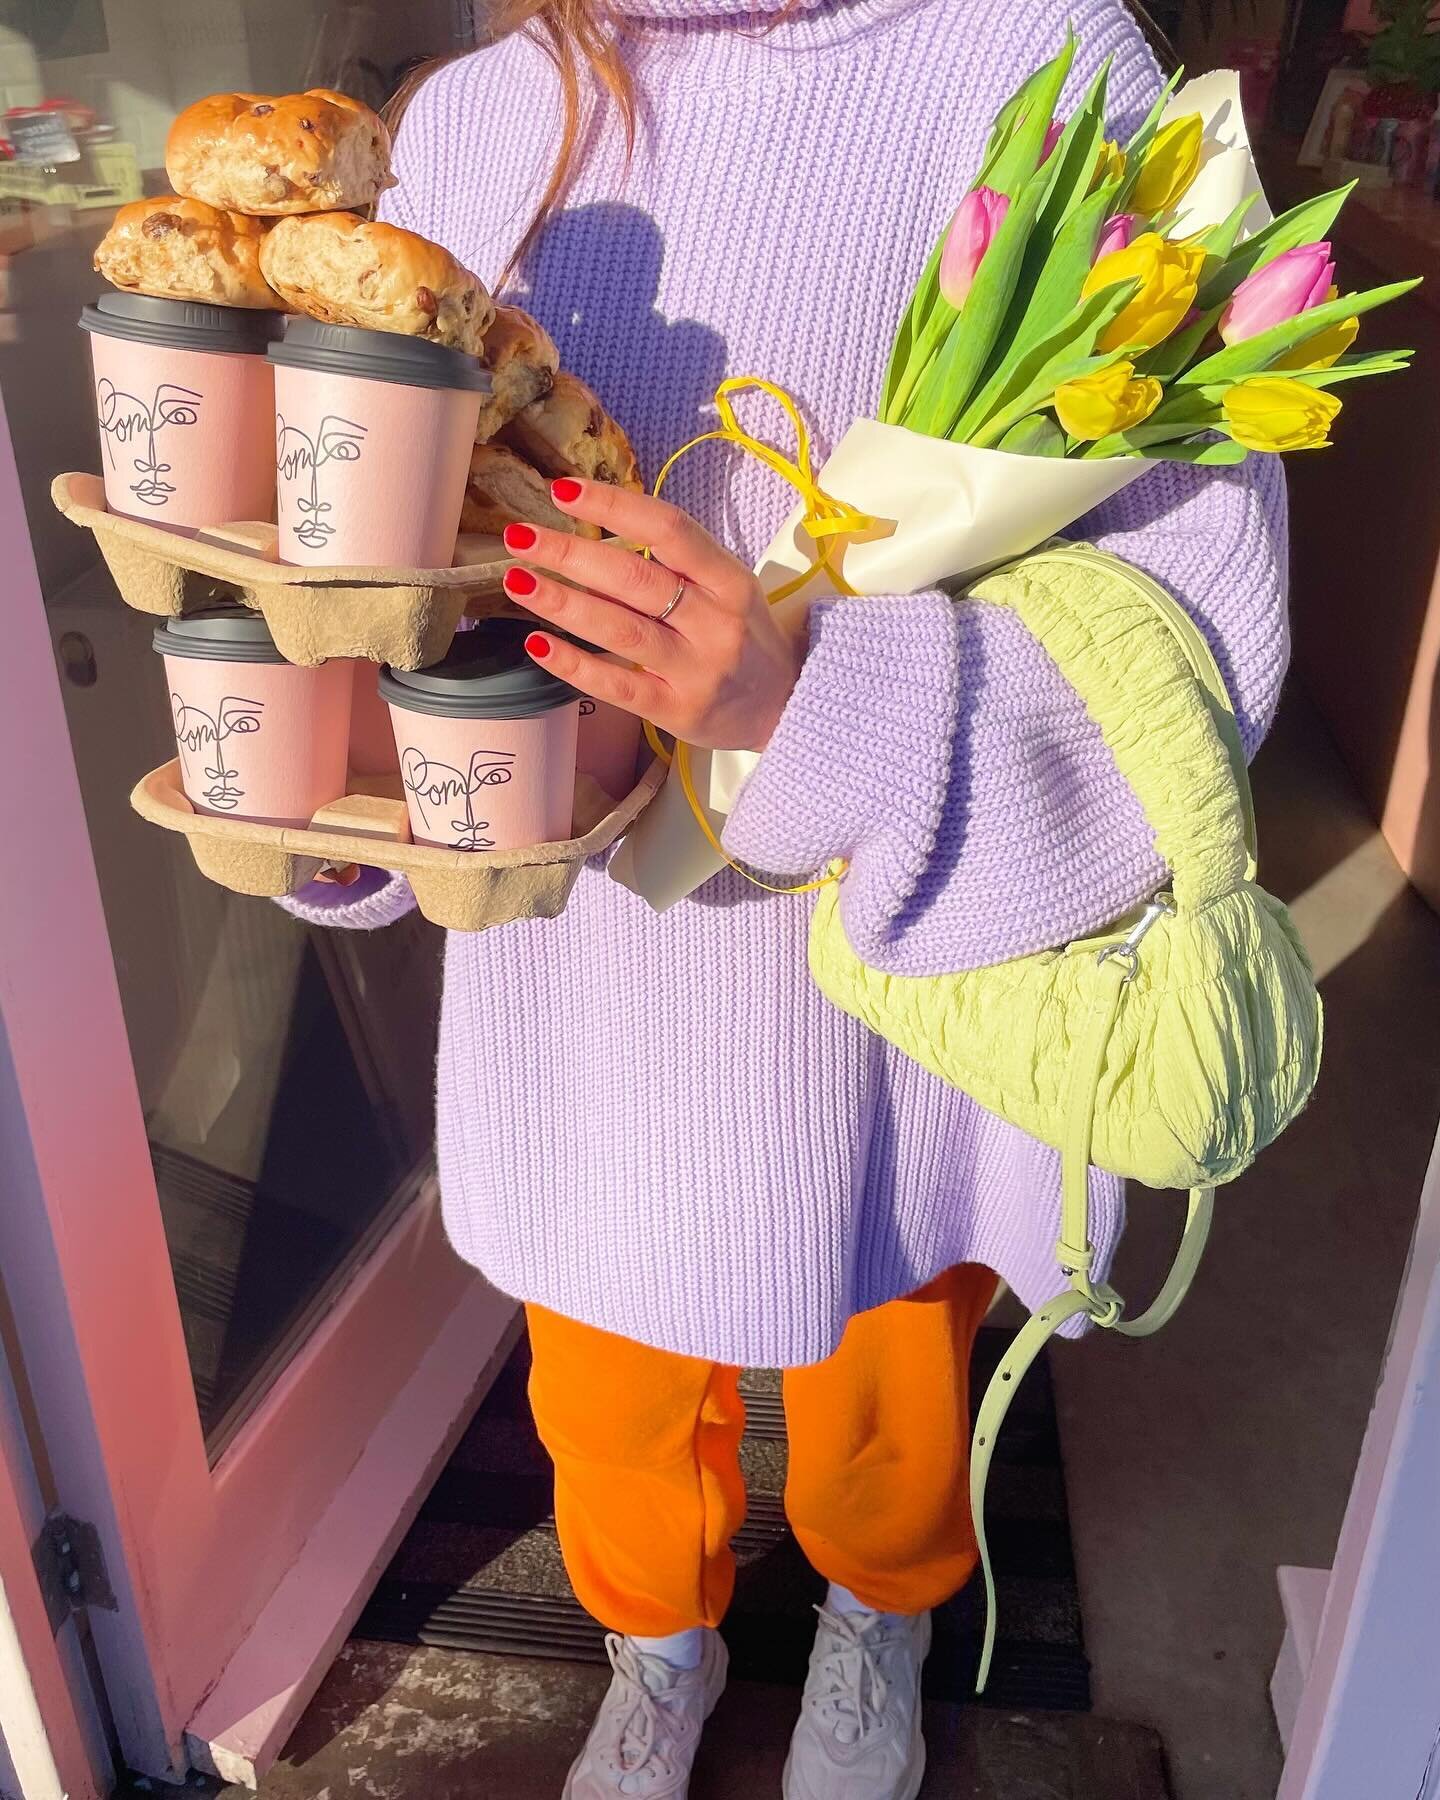 Spring Coffee Run looking like&hellip;✨🥕🌼🌞💕

We may have dug the winter coats out again but Spring is in full bloom at Pom! 

Grab a little something for your Friday treat, both Poms are here for you until 4.30 with inside seating at BOTH LOCATIO